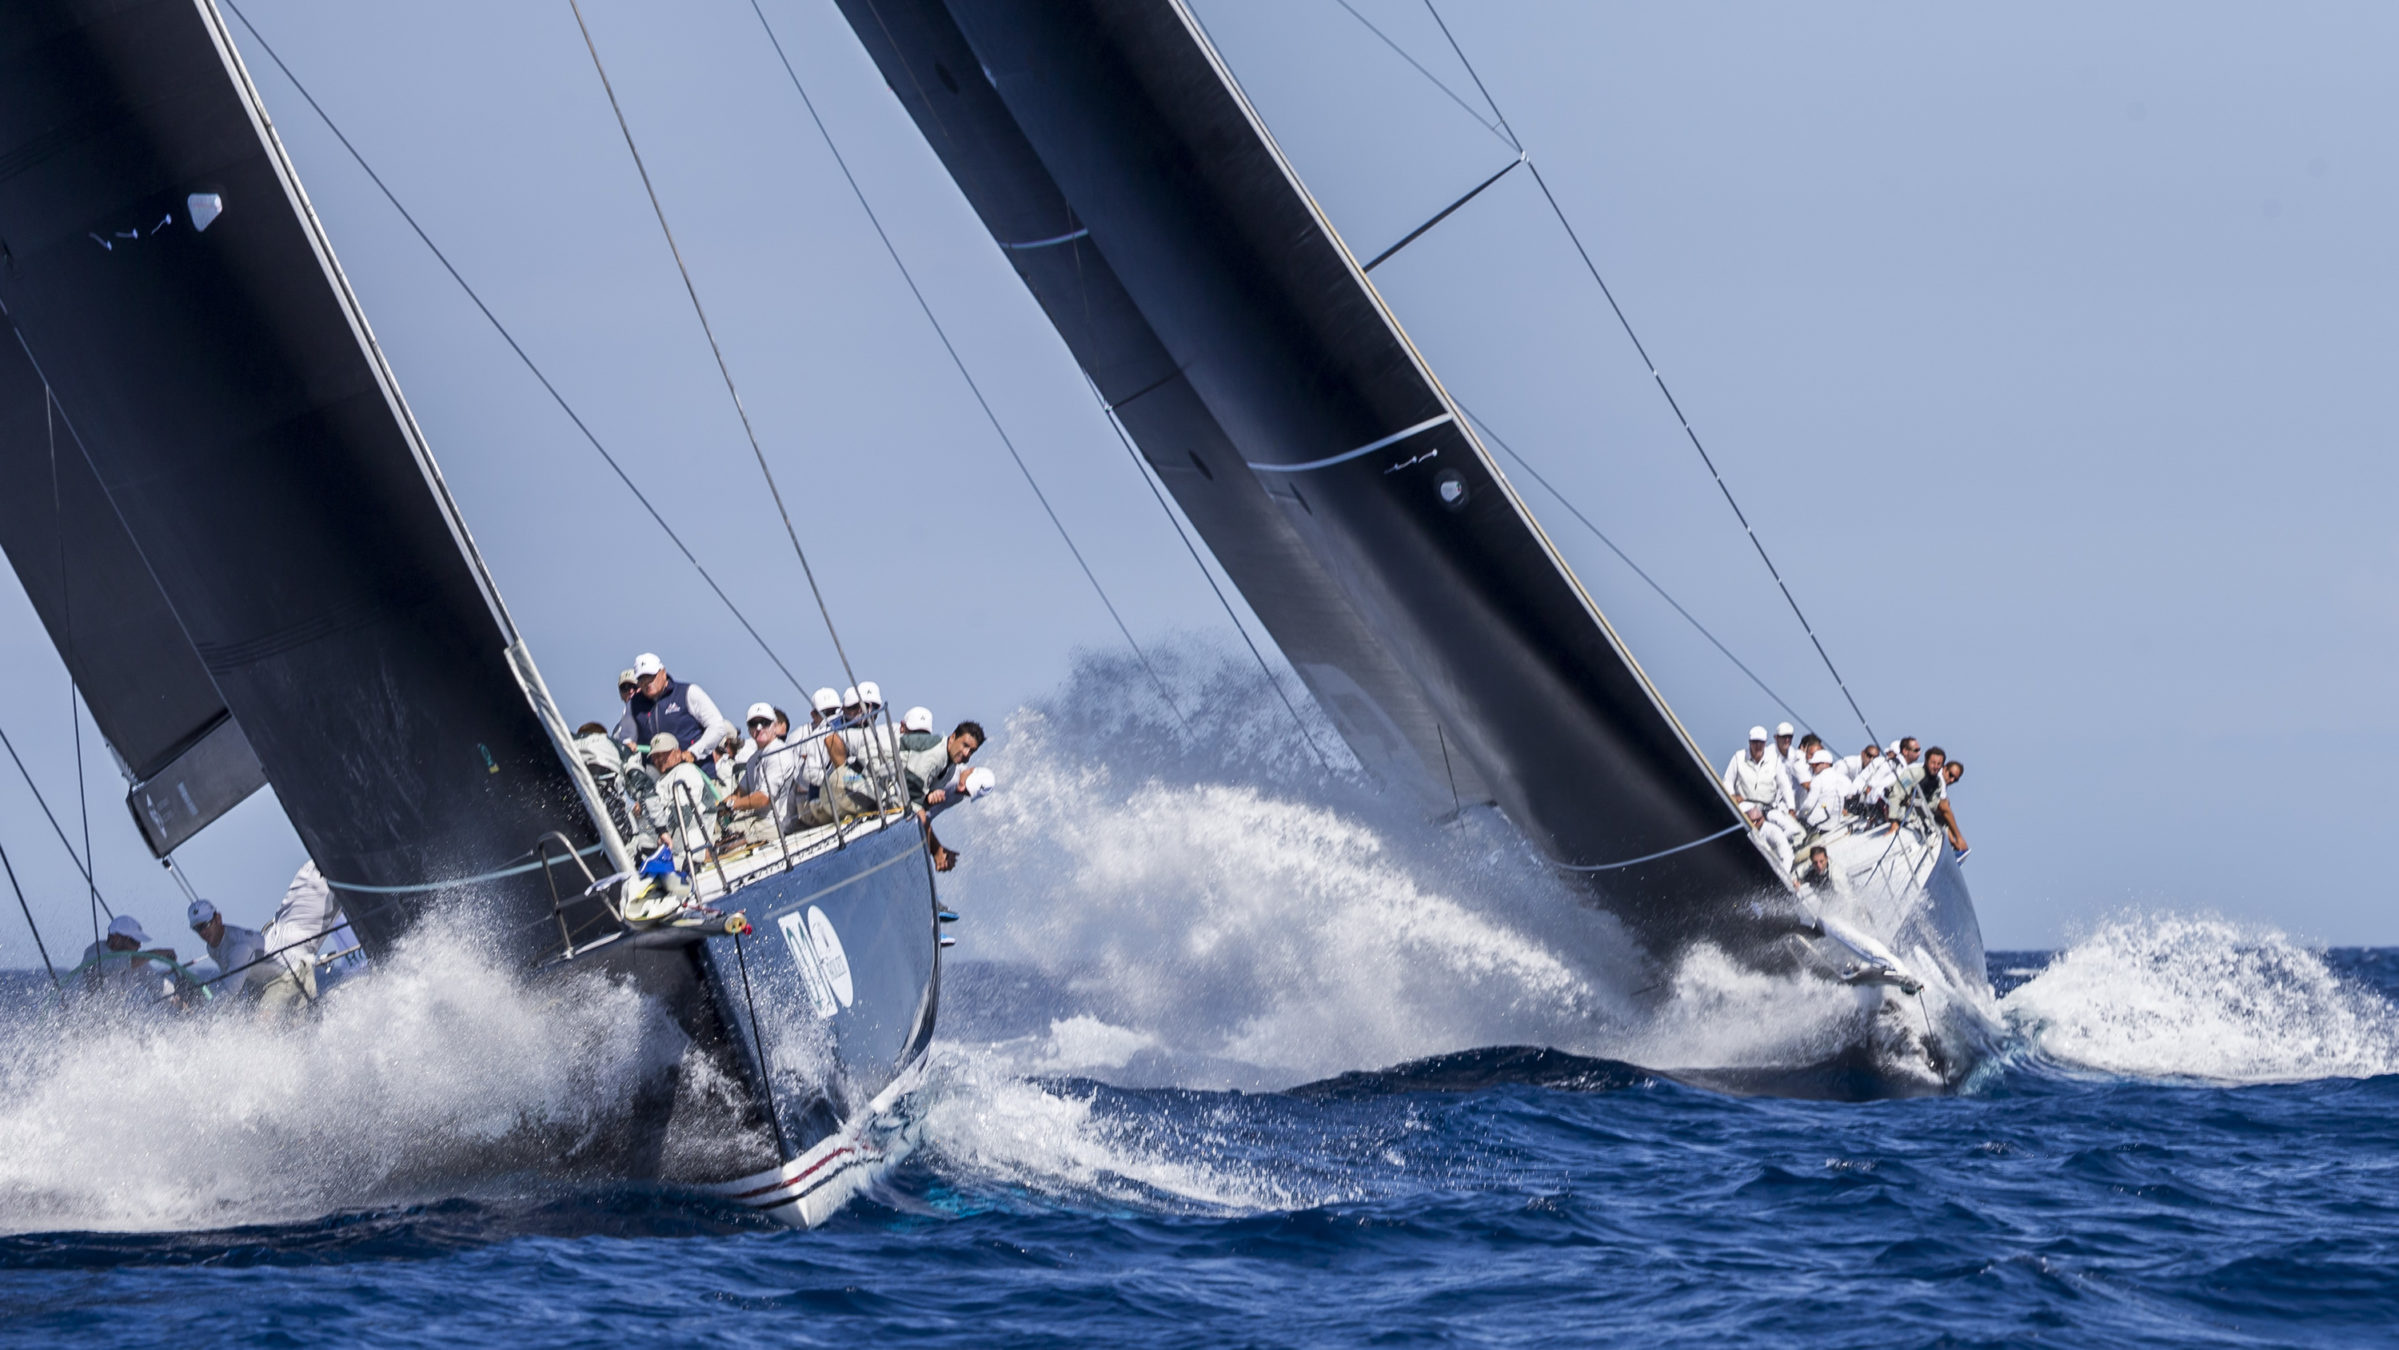 Yacht Racing: Racing Giants, Porto Cervo, Sailing, Contesting on the water, Sailboat tournament. 2400x1350 HD Background.